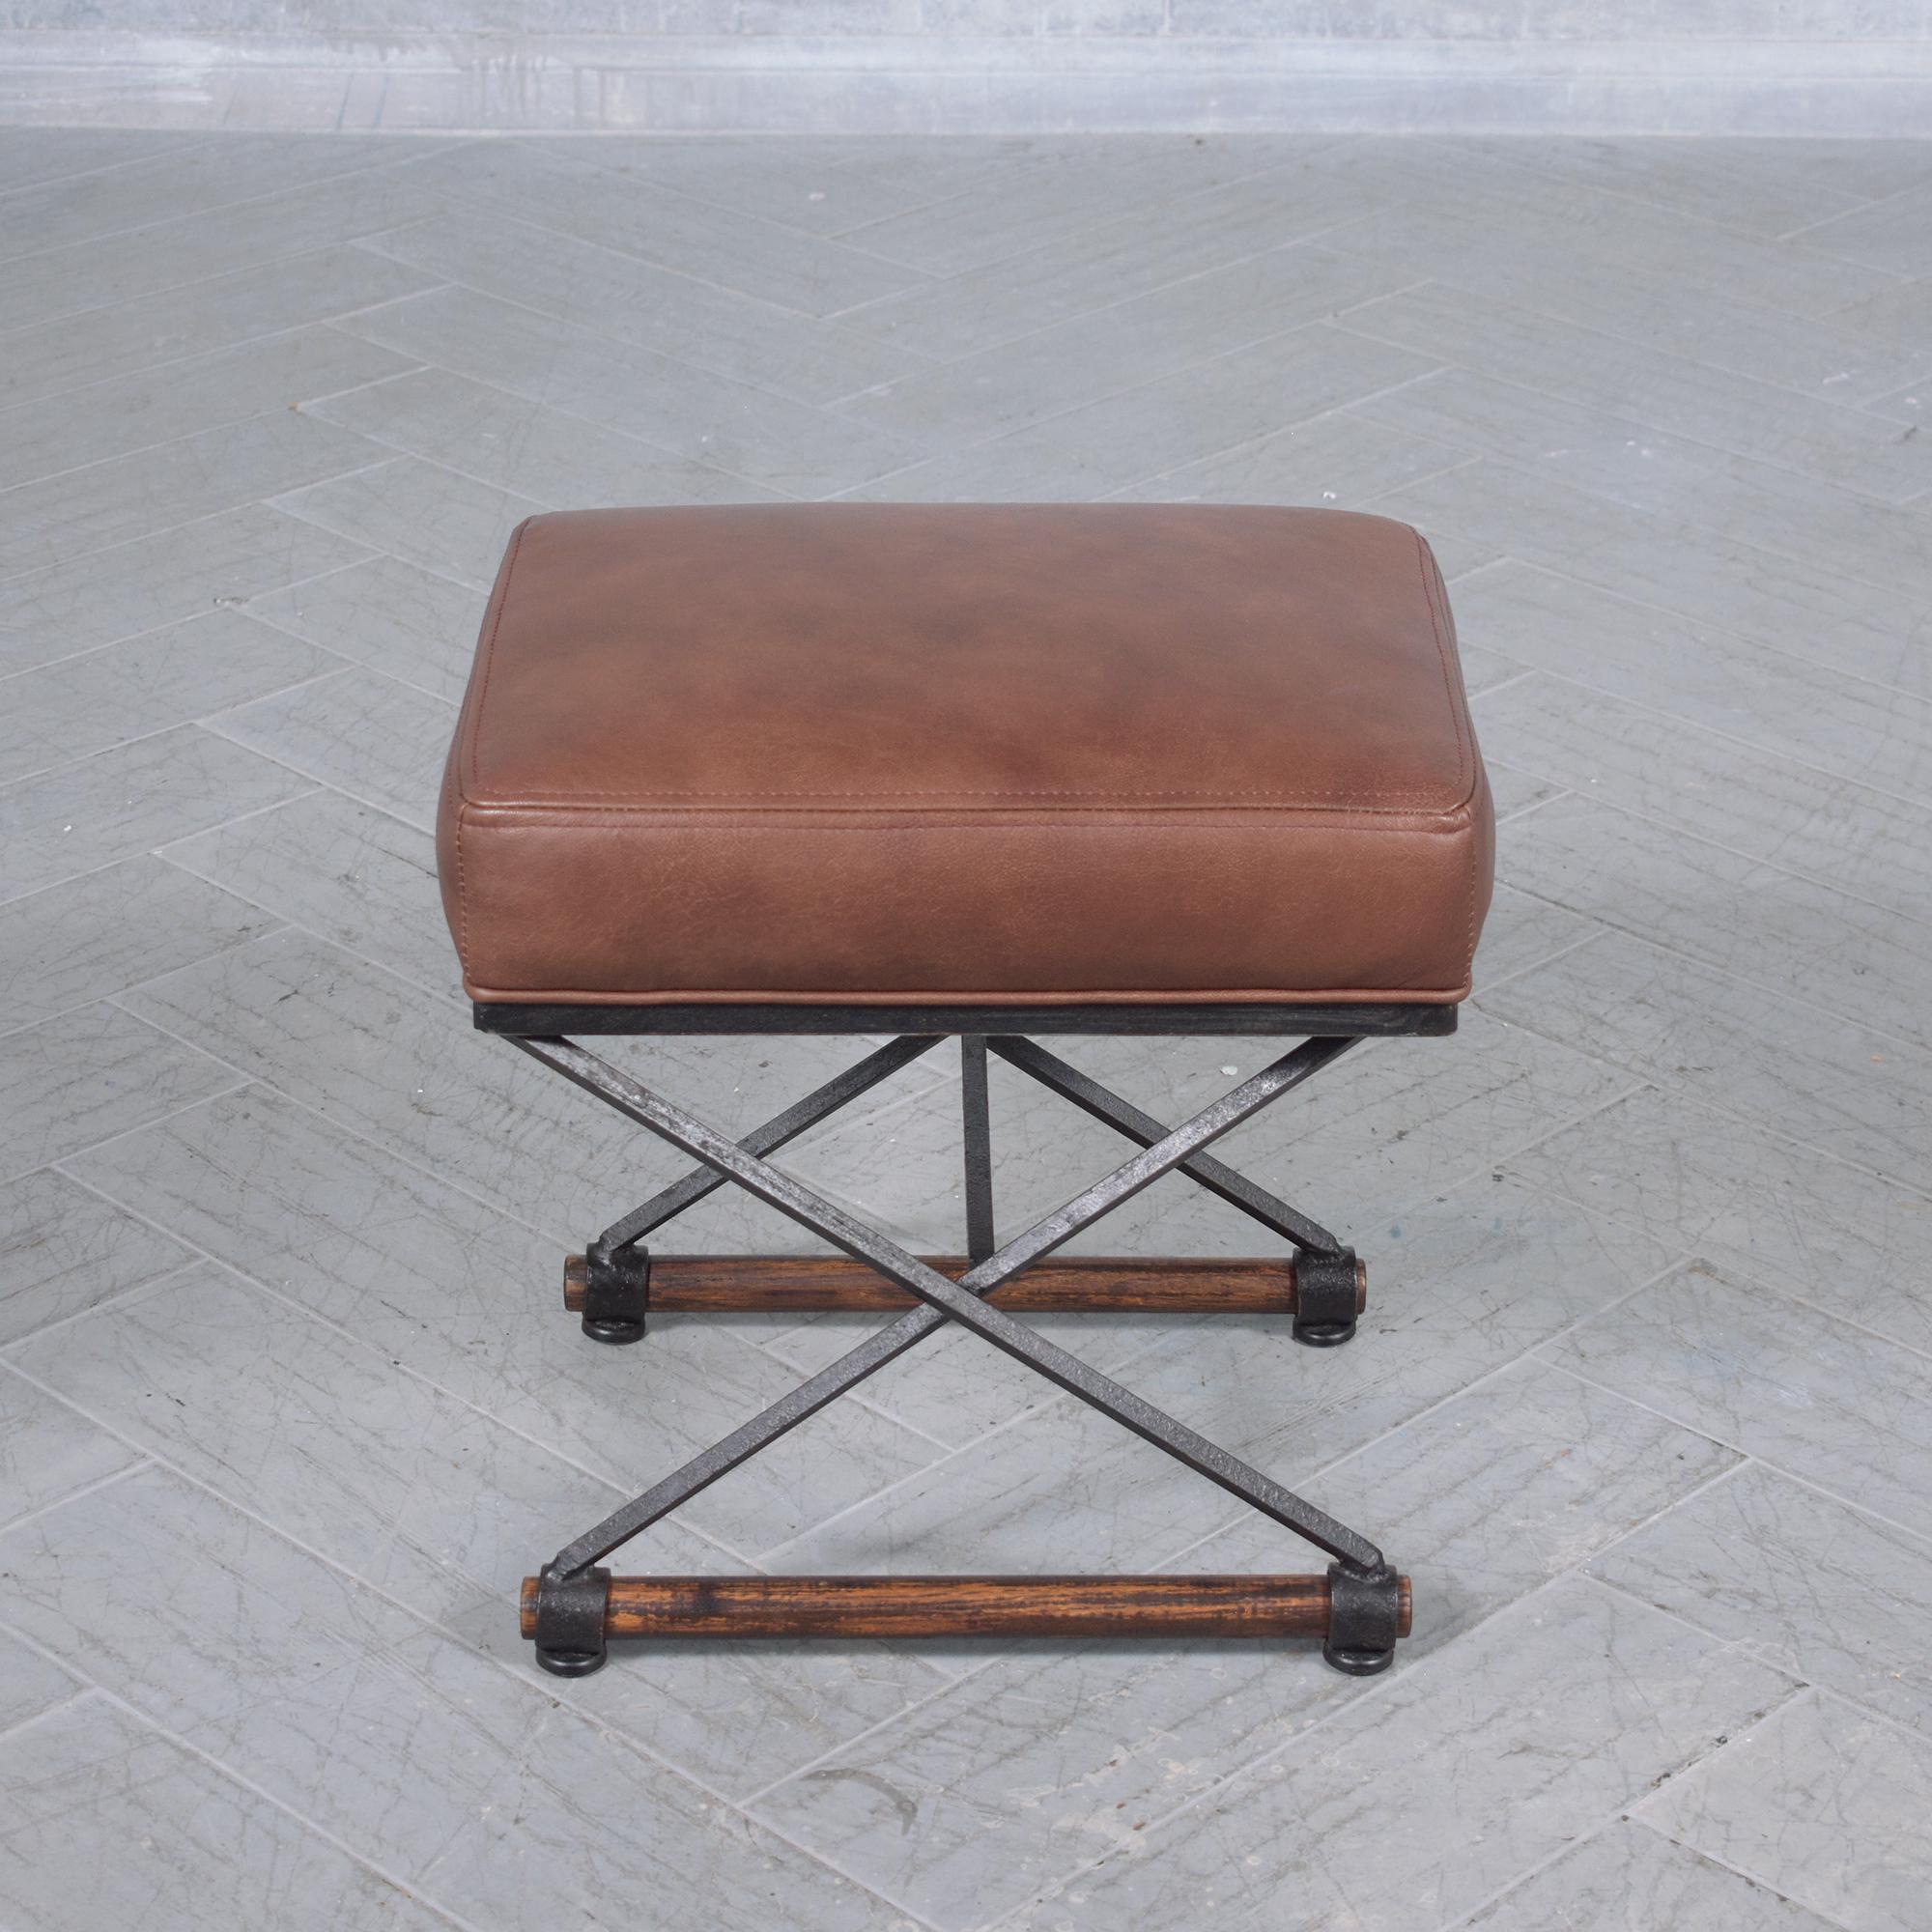 Restored 1970s Campaign Benches: Iron & Oak with Dark Brown Leather Upholstery 2